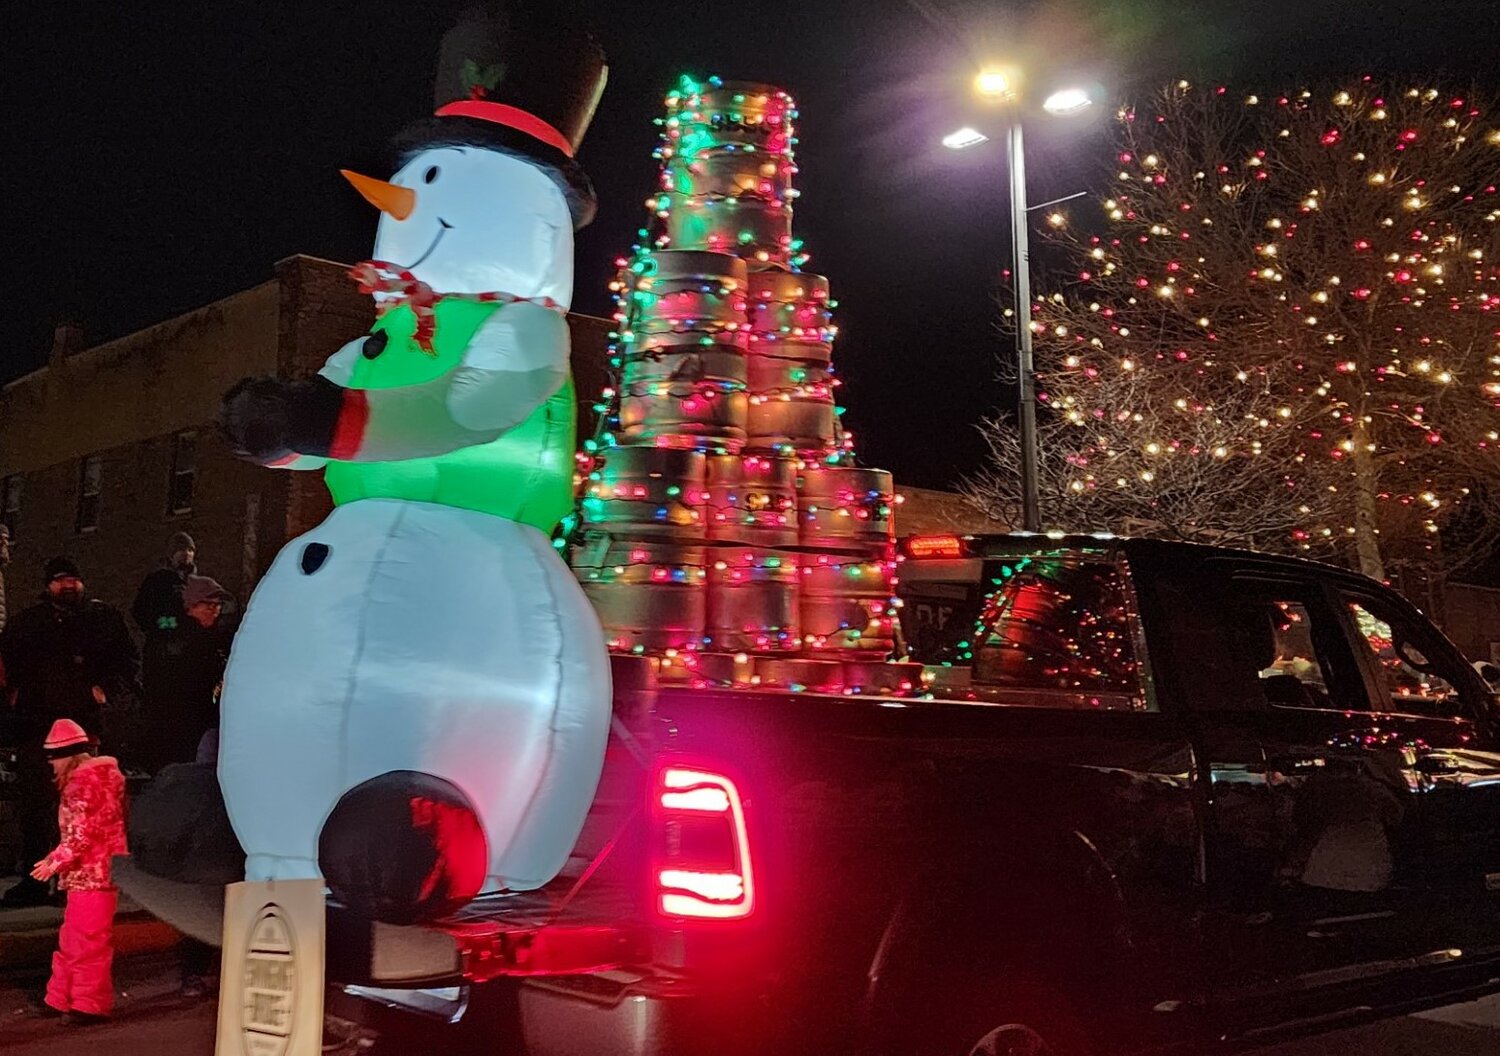 Frosty the Snowman was watching over beer barrels on this float in the River Dazzle parade, held on frigid Friday, Nov. 24 downtown River Falls.